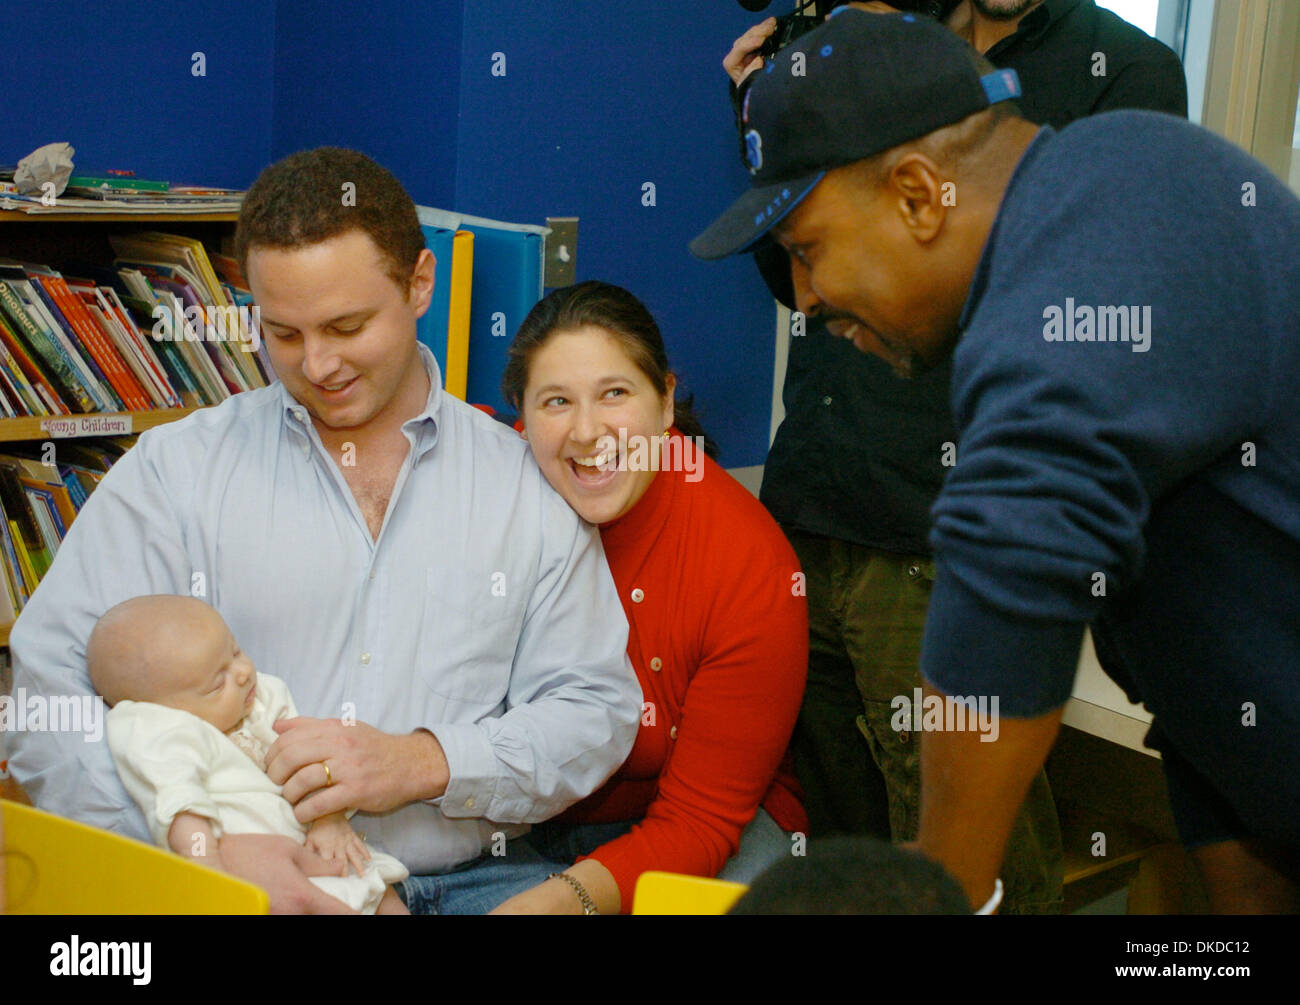 Dec 11, 2006; New York, NY, USA; NY Mets manager WILLIE RANDOLPH (R) greets Jonathan and Loren holding their son Sean, 6 weeks old as he spreads holiday cheer to pediatric patients at the Kominsky Center for Children's Health at NewYork-Presbyterian/Weill Cornell.  Mandatory Credit: Photo by Bryan Smith/ZUMA Press. (©) Copyright 2006 by Bryan Smith Stock Photo